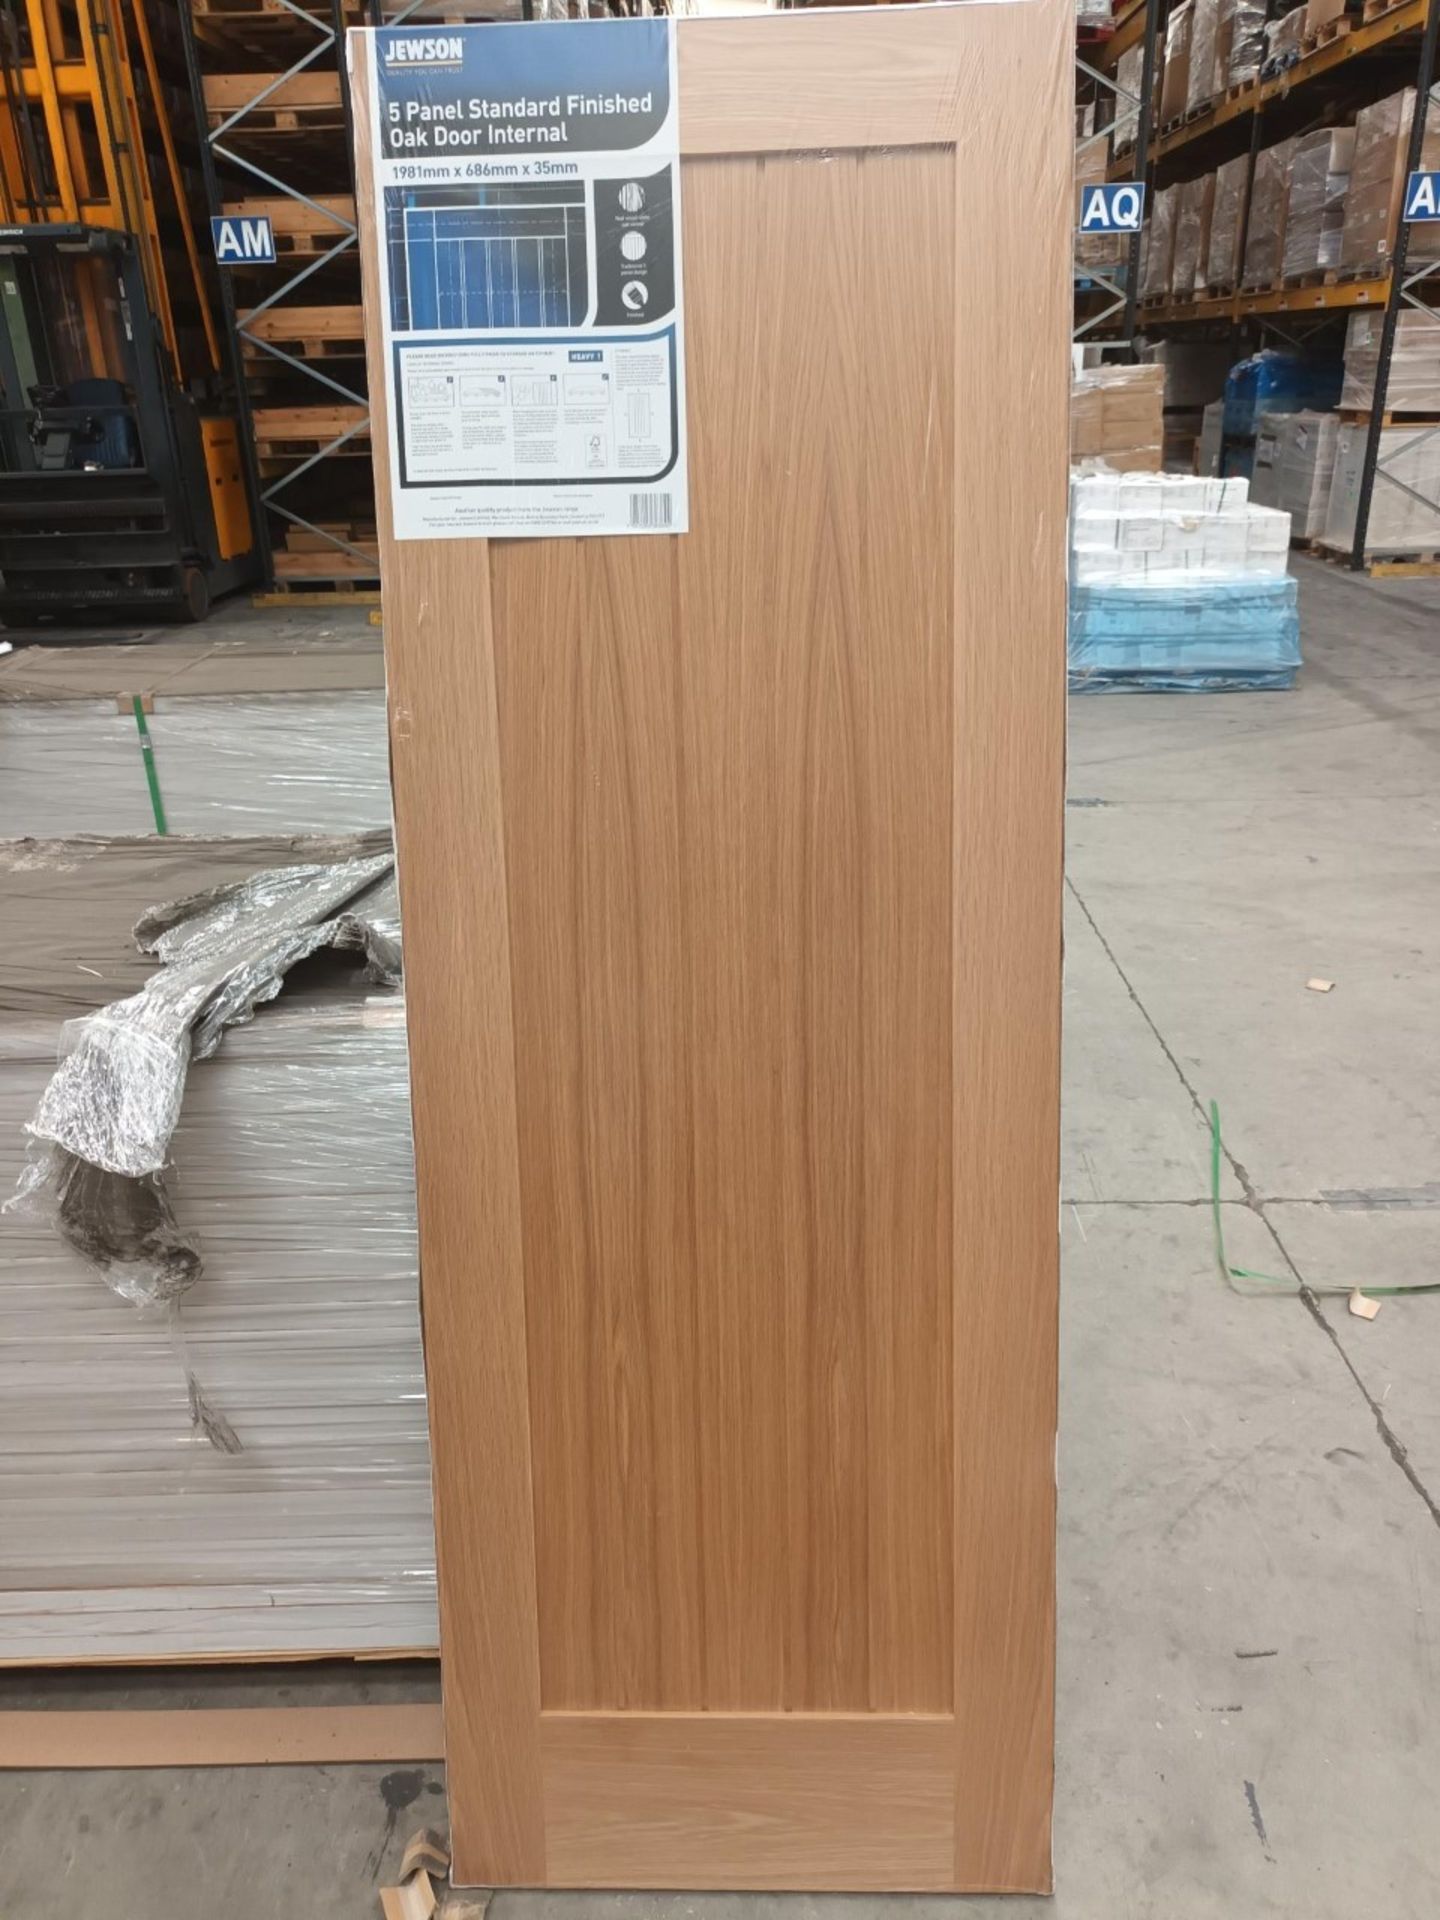 PALLET LOT 26 X NEW PACKAGED 5 PANEL OAK FINISHED DOORS. RRP £234 EACH, GIVING THIS LOT A TOTAL